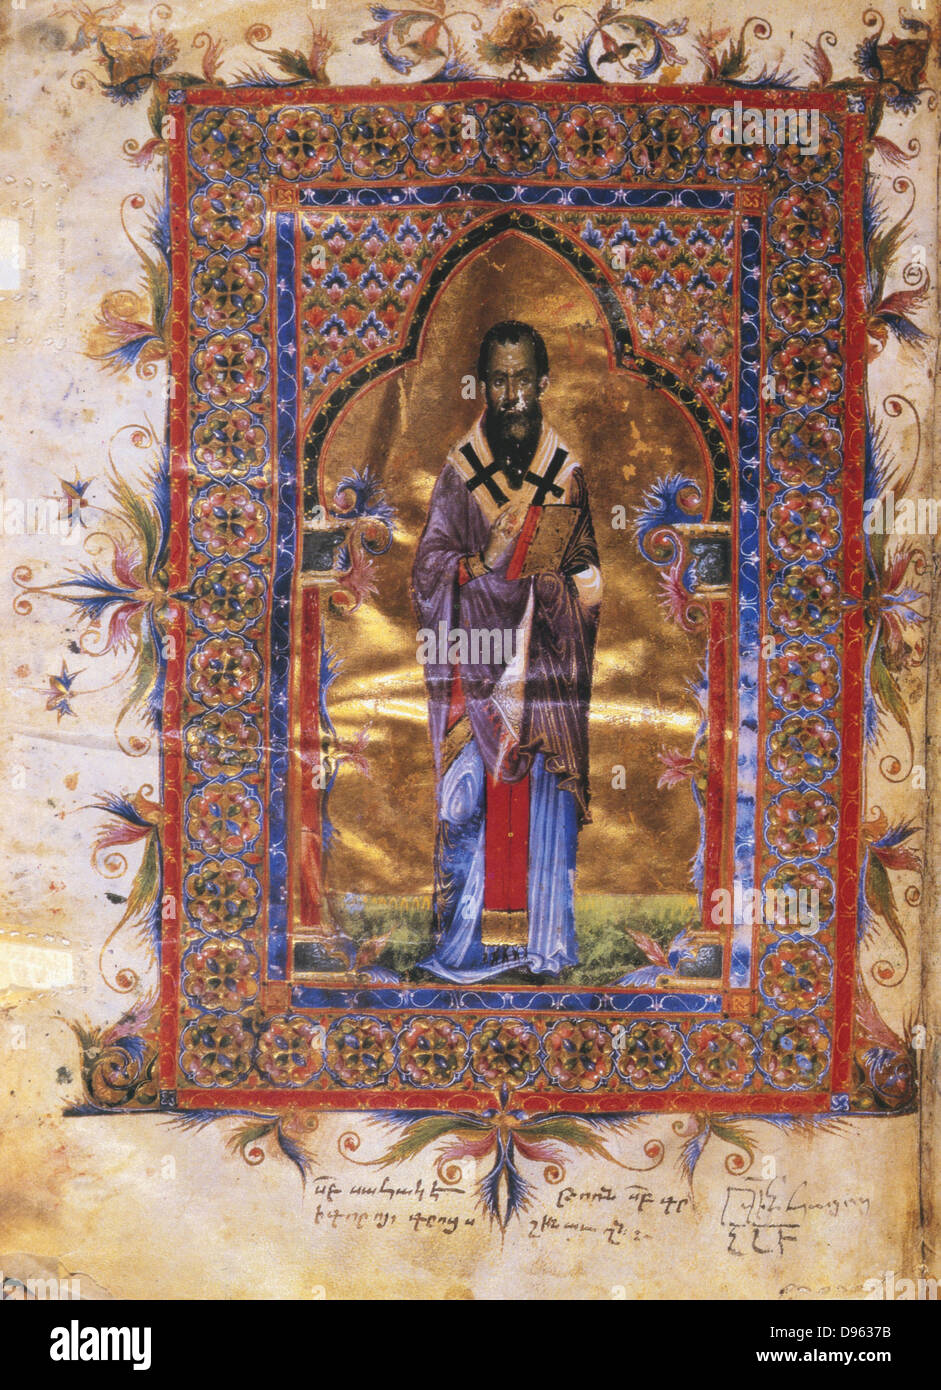 St Basil the Great (c.329-379) one of greatest Greek fathers of the Christian church. Bishop of Caesarea from 370. Armenian manuscript of 1286. Stock Photo